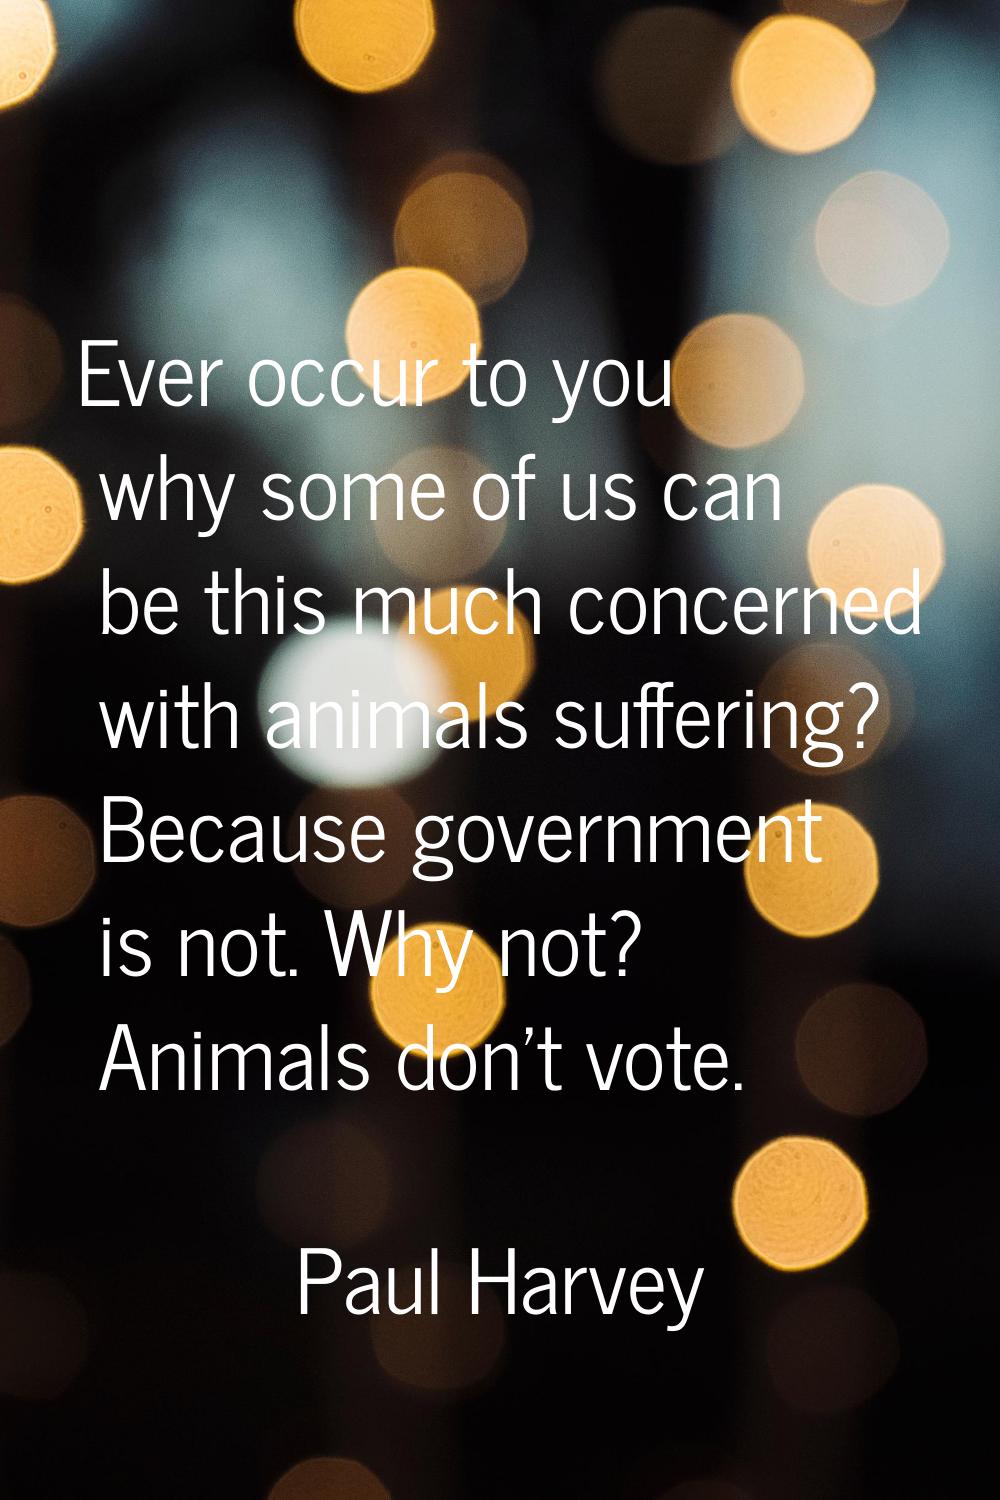 Ever occur to you why some of us can be this much concerned with animals suffering? Because governm